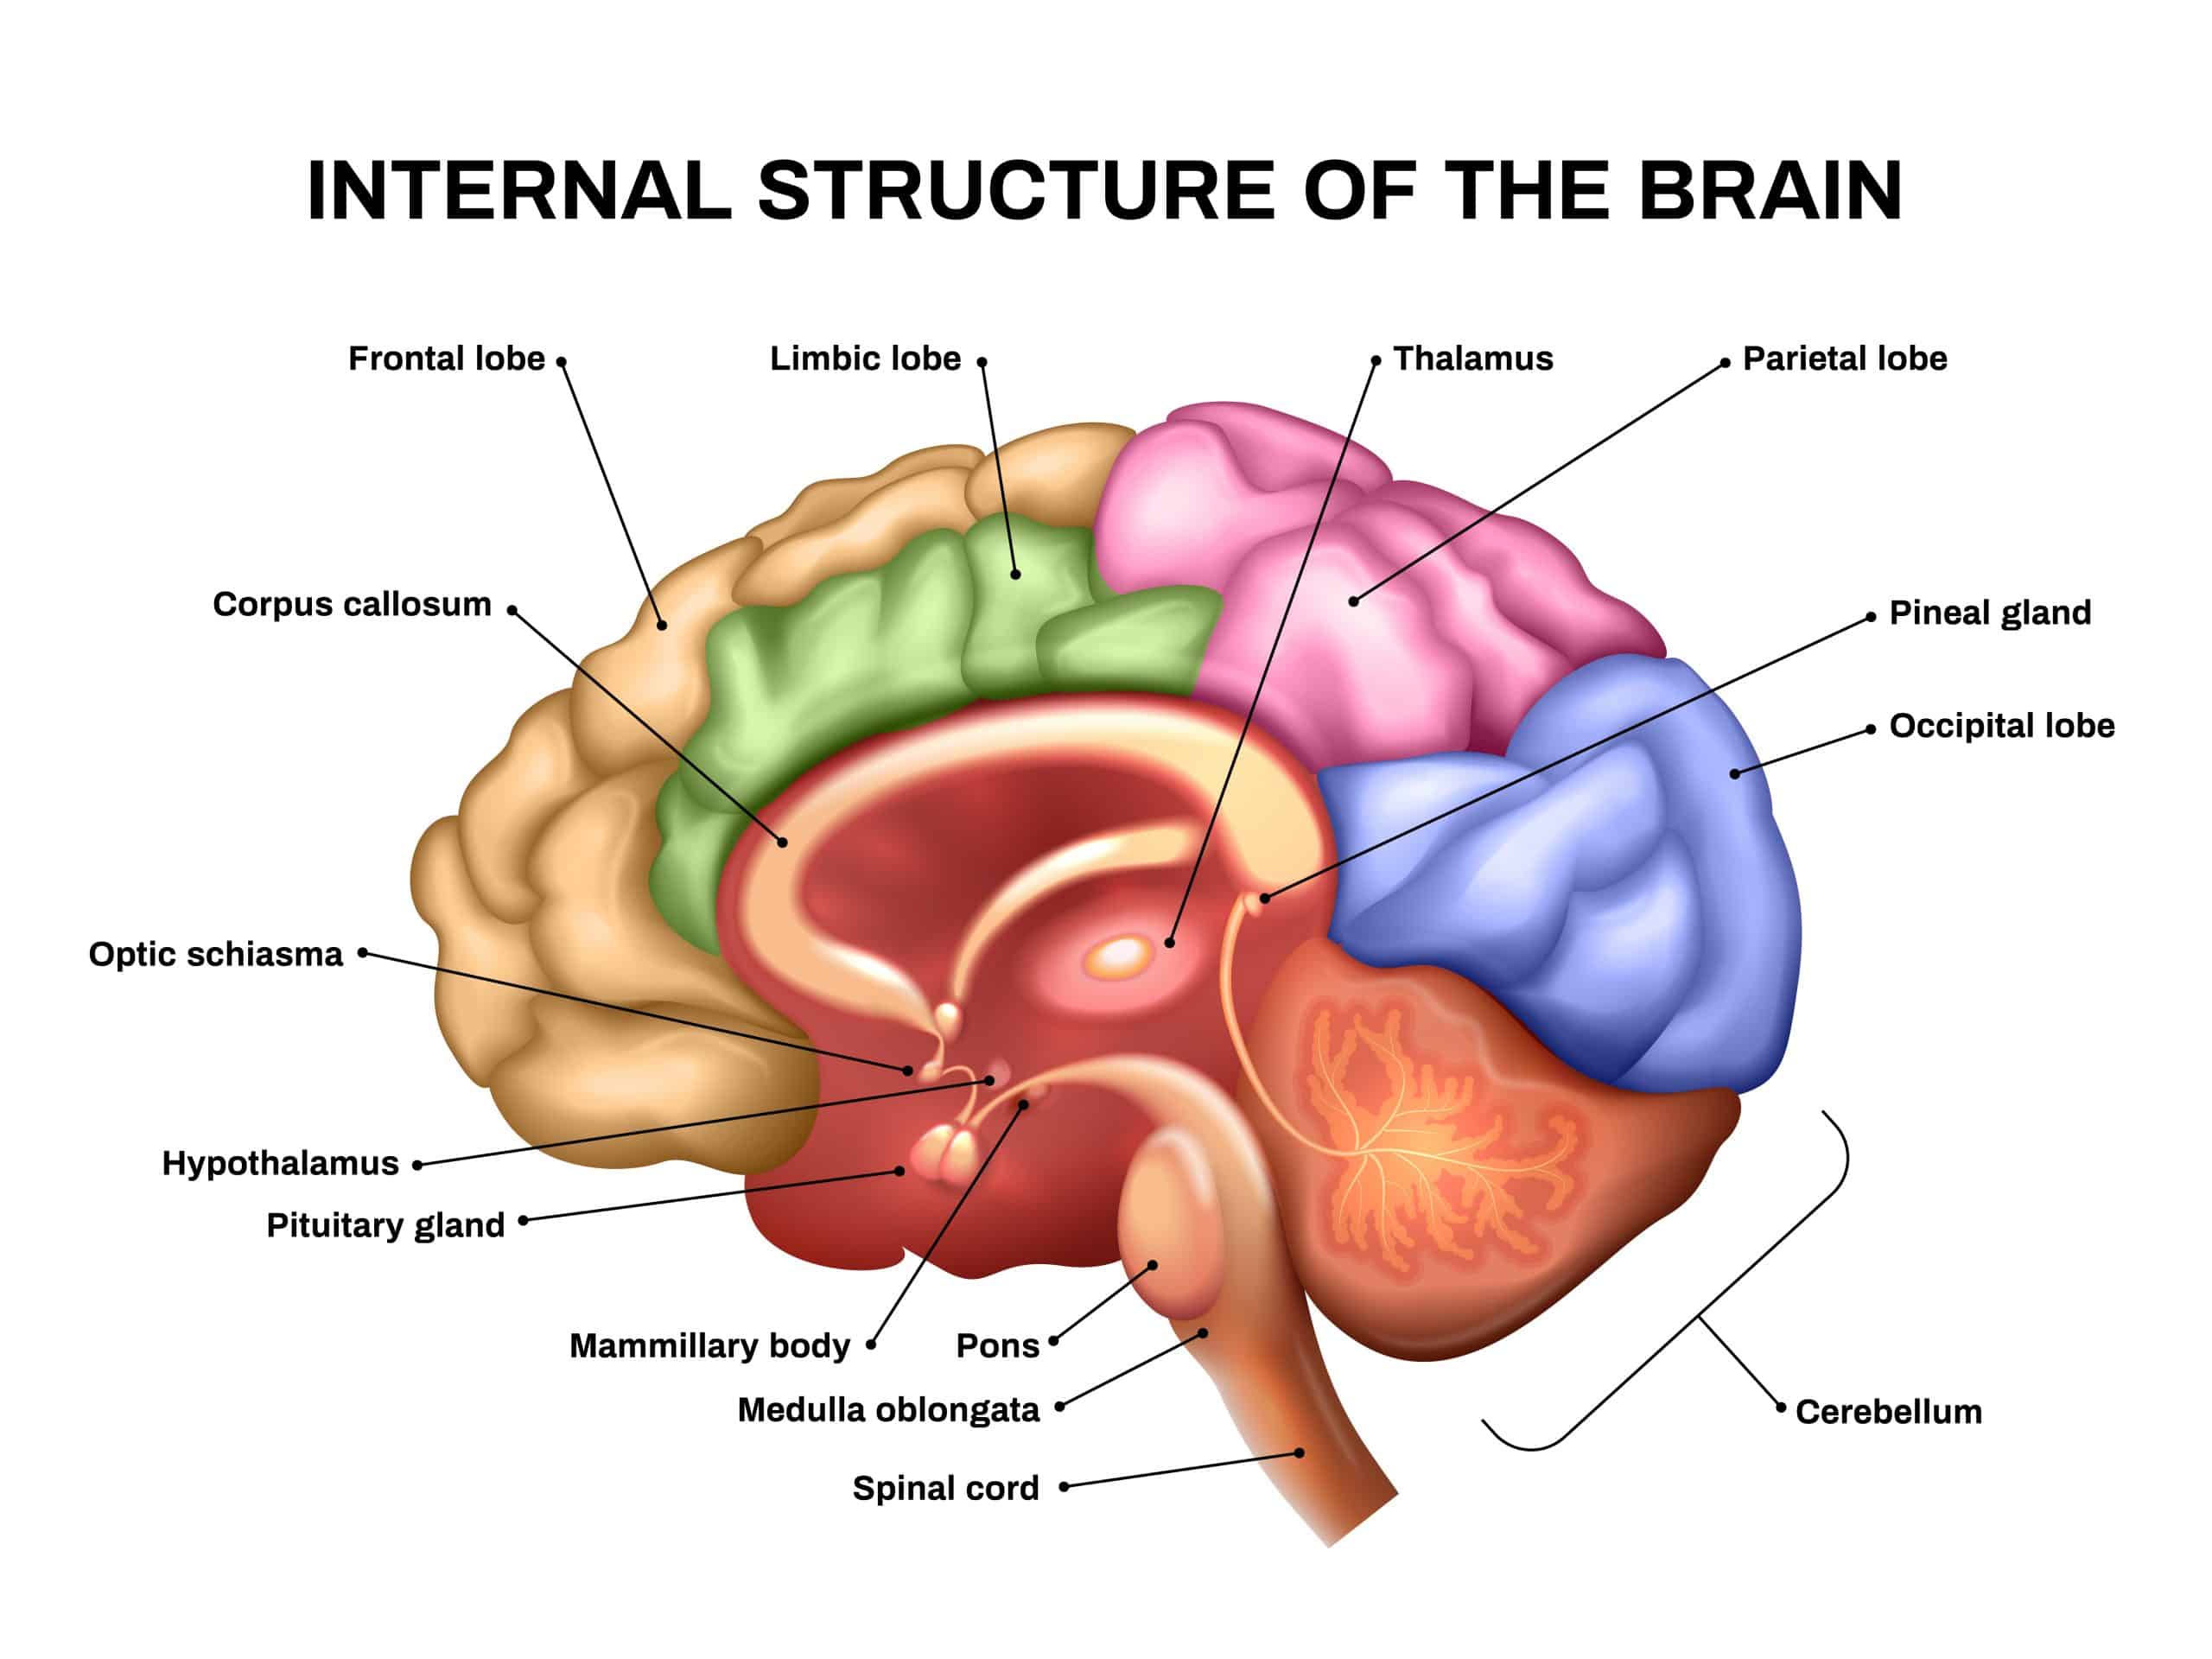 Realistic image of the brain with anatomy labels